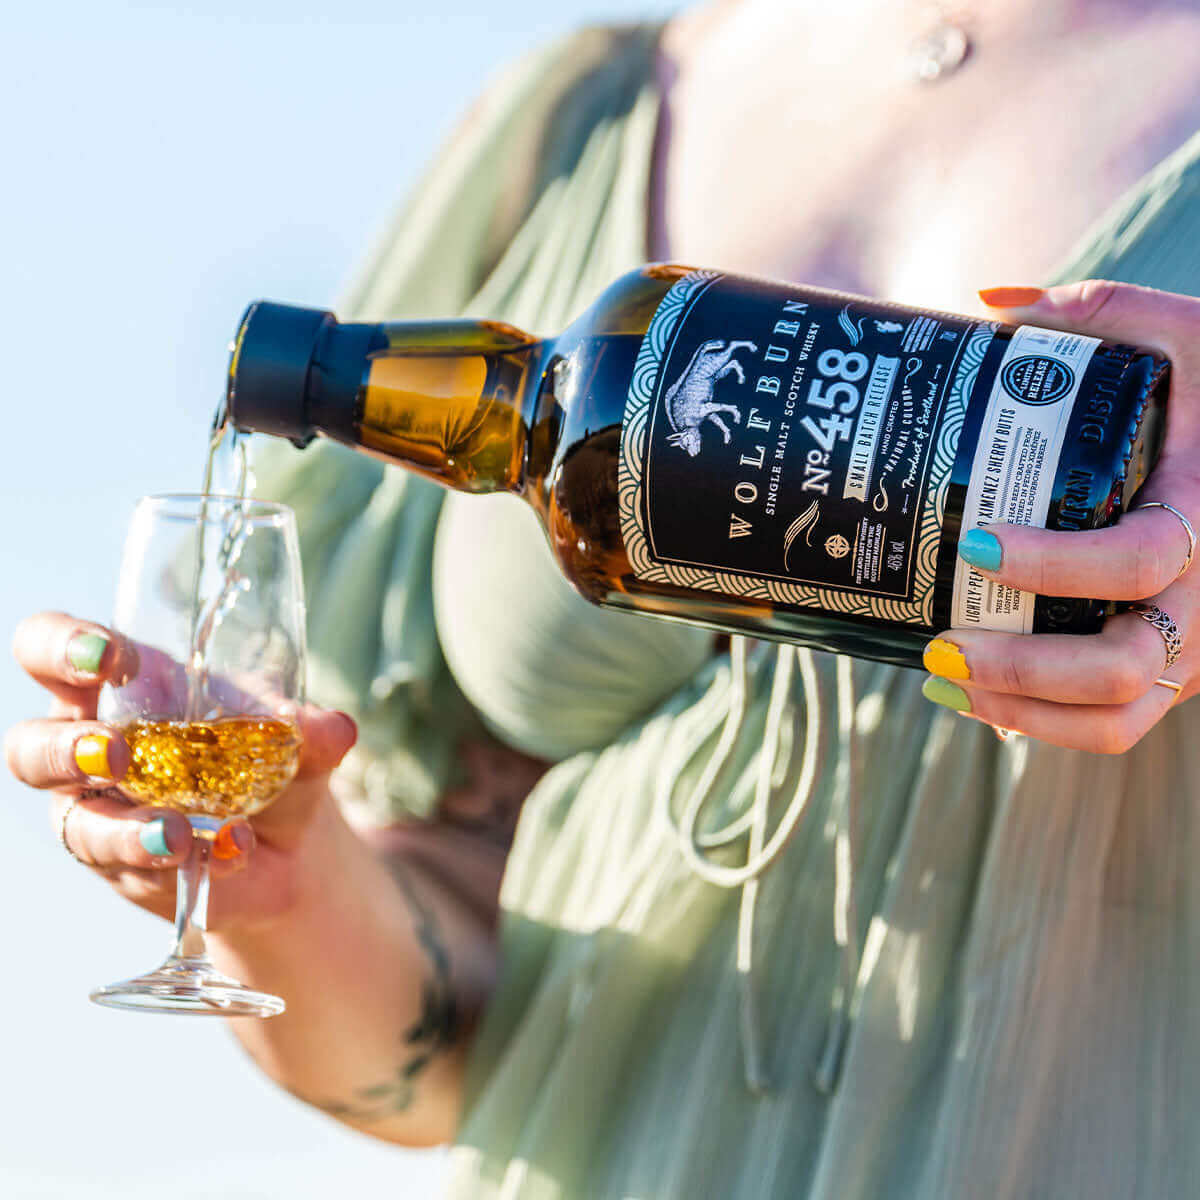 
                  
                    Wolfburn Distillery Wolfburn Small Batch 458 - 46% VOL. 70CL The seventh small-batch release from Wolfburn, Batch 458 has been crafted from a 50/50 combination of whisky matured for seven years in first-fill Pedro Ximénez sherry butts, married with lightl
                  
                